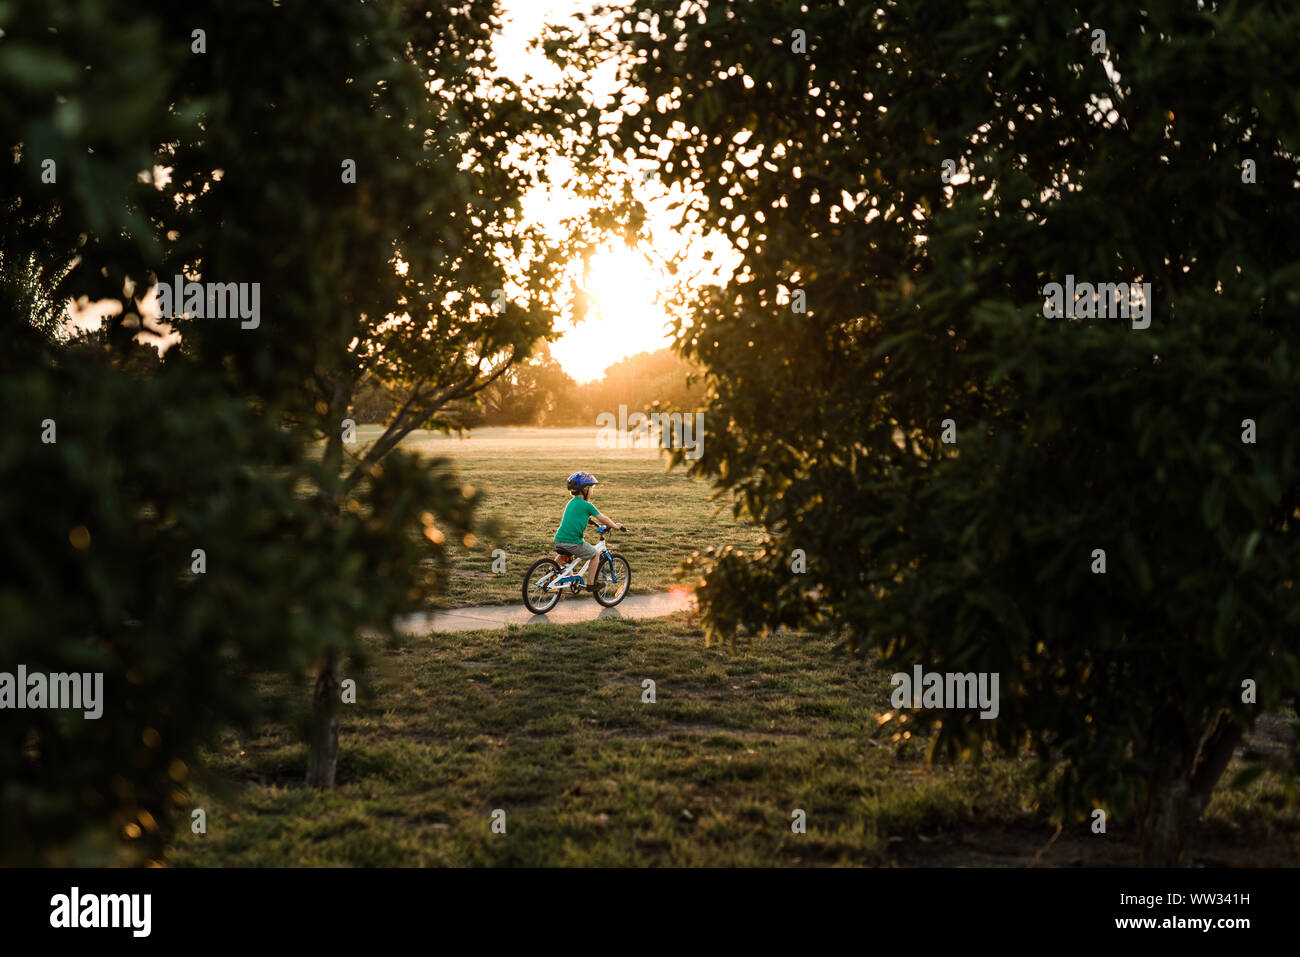 Preschooler riding a bicycle on sidewalk at sunset Stock Photo